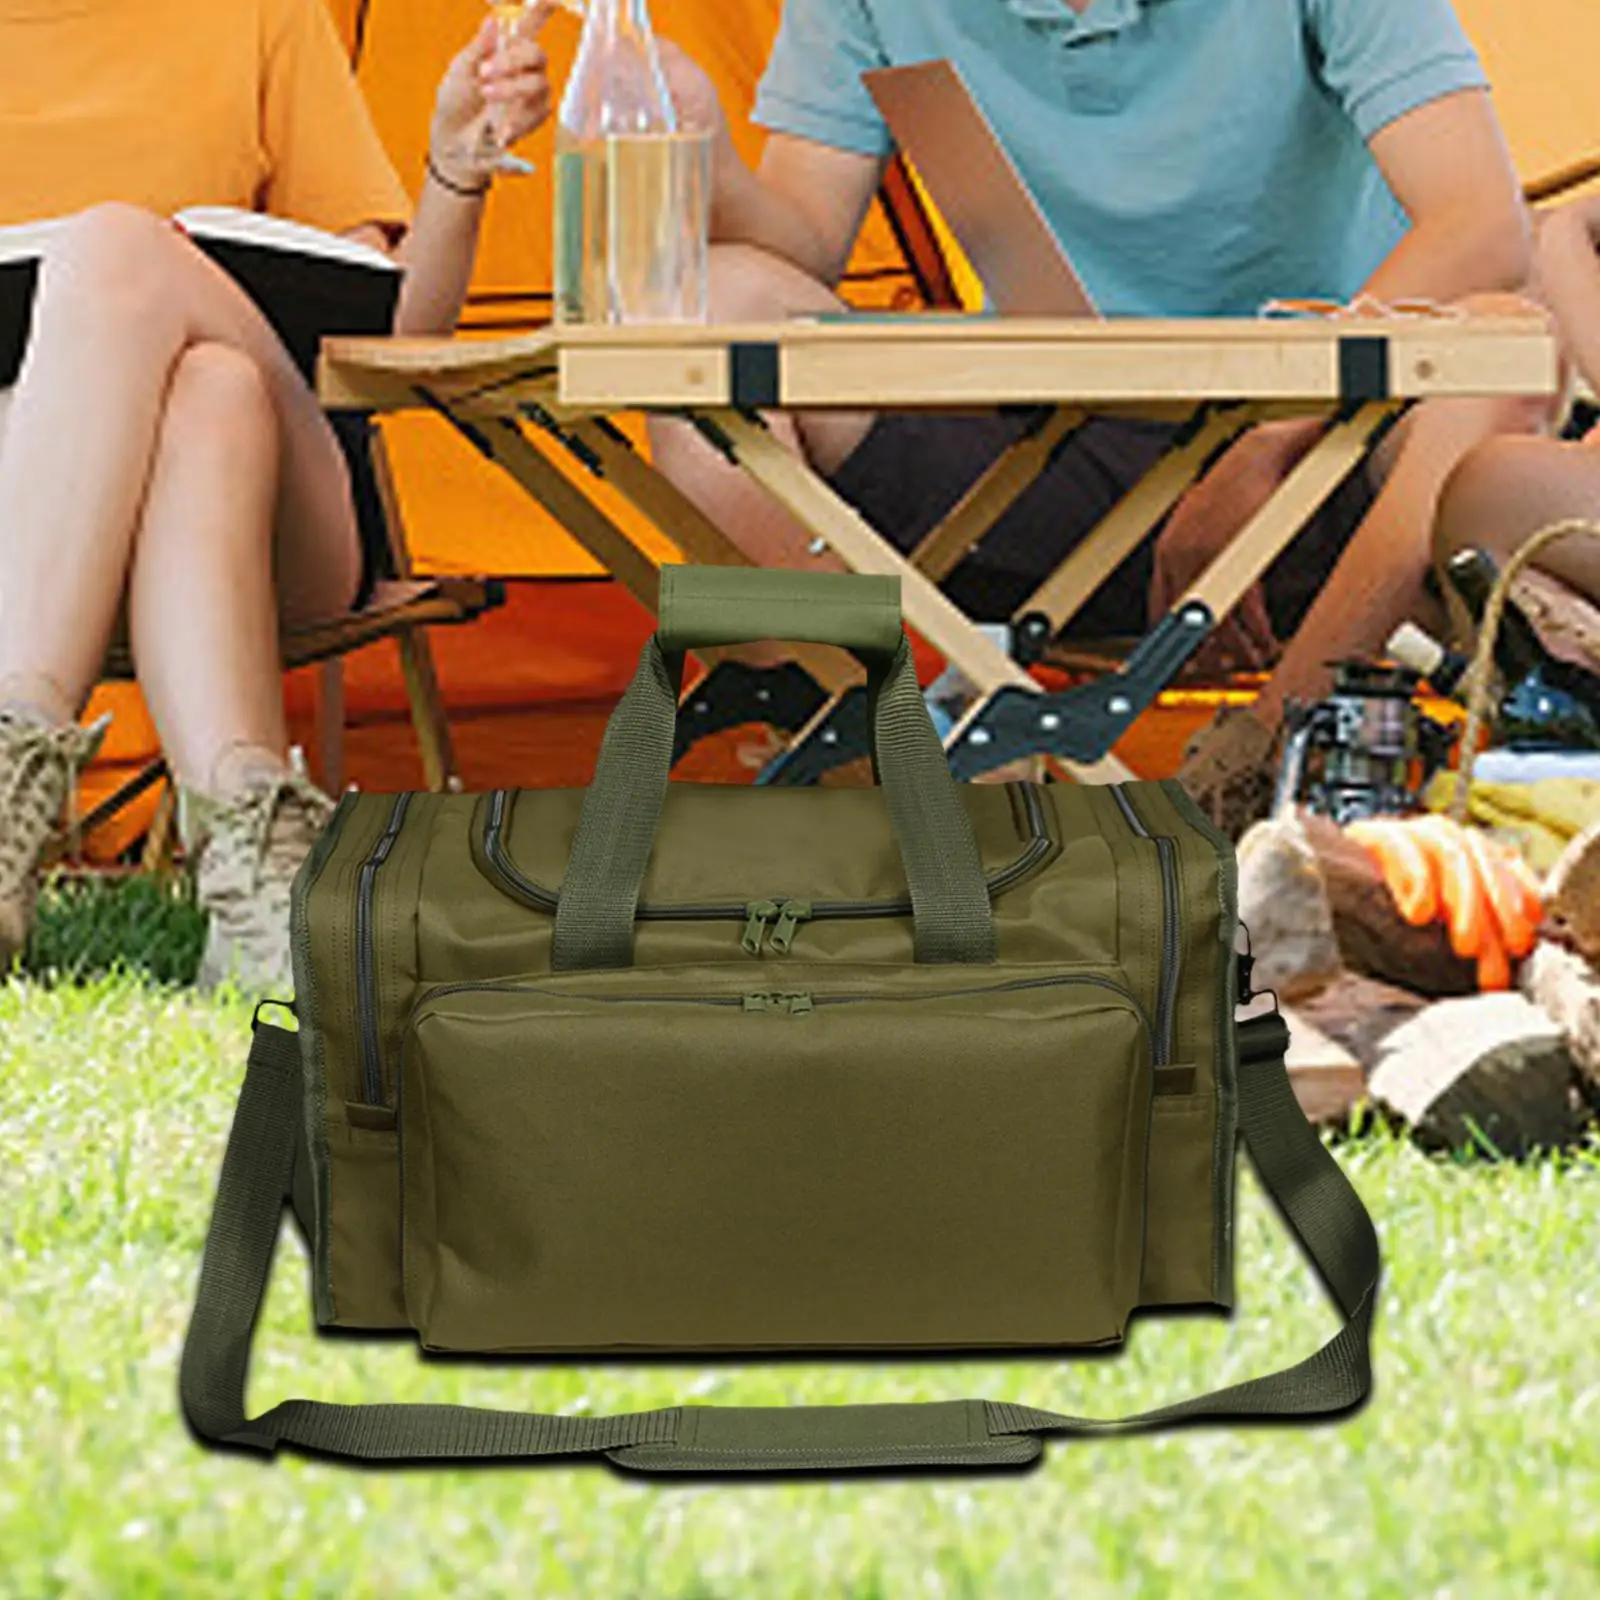 Camping Bag Lunch Box Large Capacity Oxford Cloth Portable for Hiking Grill